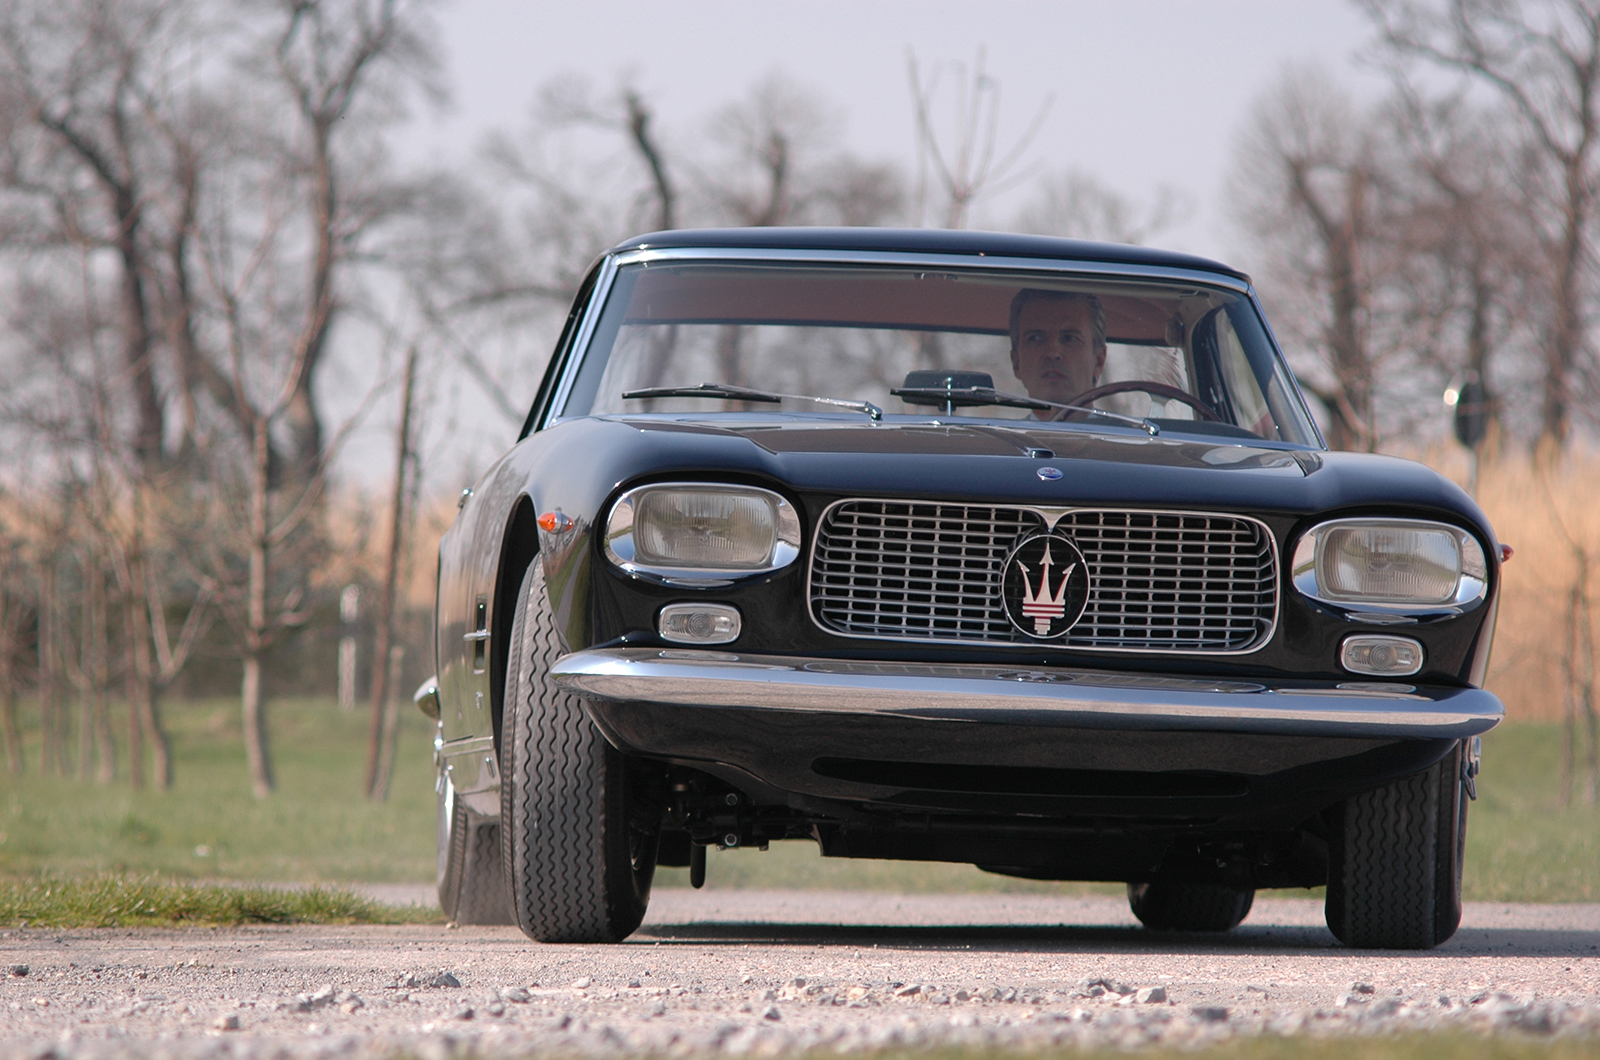 Command performance: the story of the Maserati 5000GT